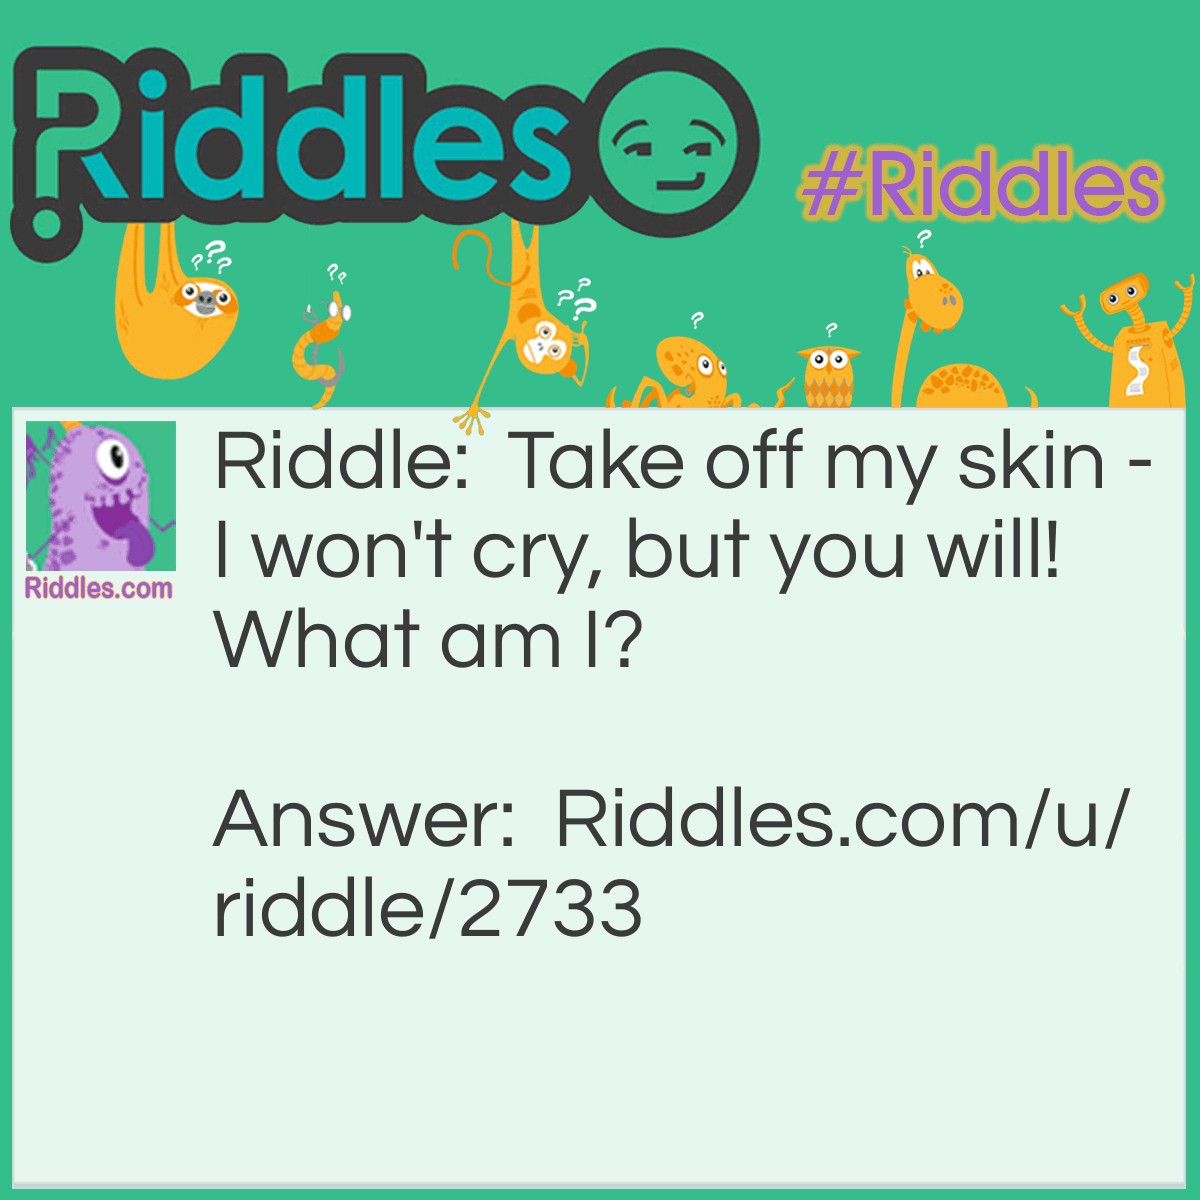 Riddle: Take off my skin - I won't cry, but you will! What am I? Answer: An onion.